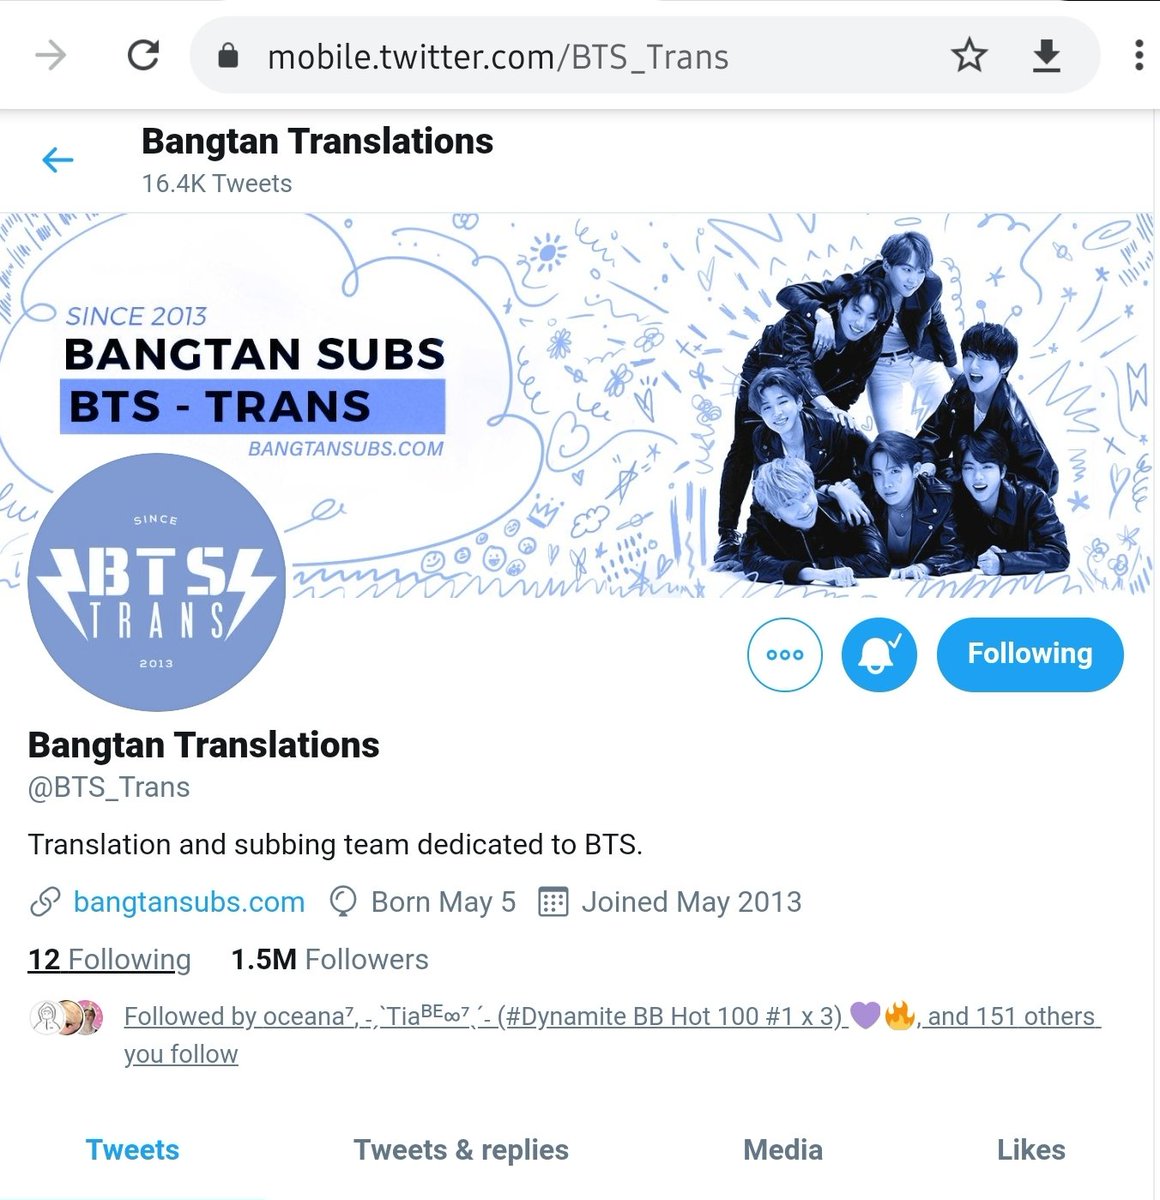 Translators: These are all FREE work. If you don't find the translation satisfactory, find alternative translator! I follow multiple so that I get the right context! You can pick yourself!  @BTS_Trans  @btstranslation7  @doyou_bangtan Media Updates -  @tannienews  #BTSARMY  @BTS_twt